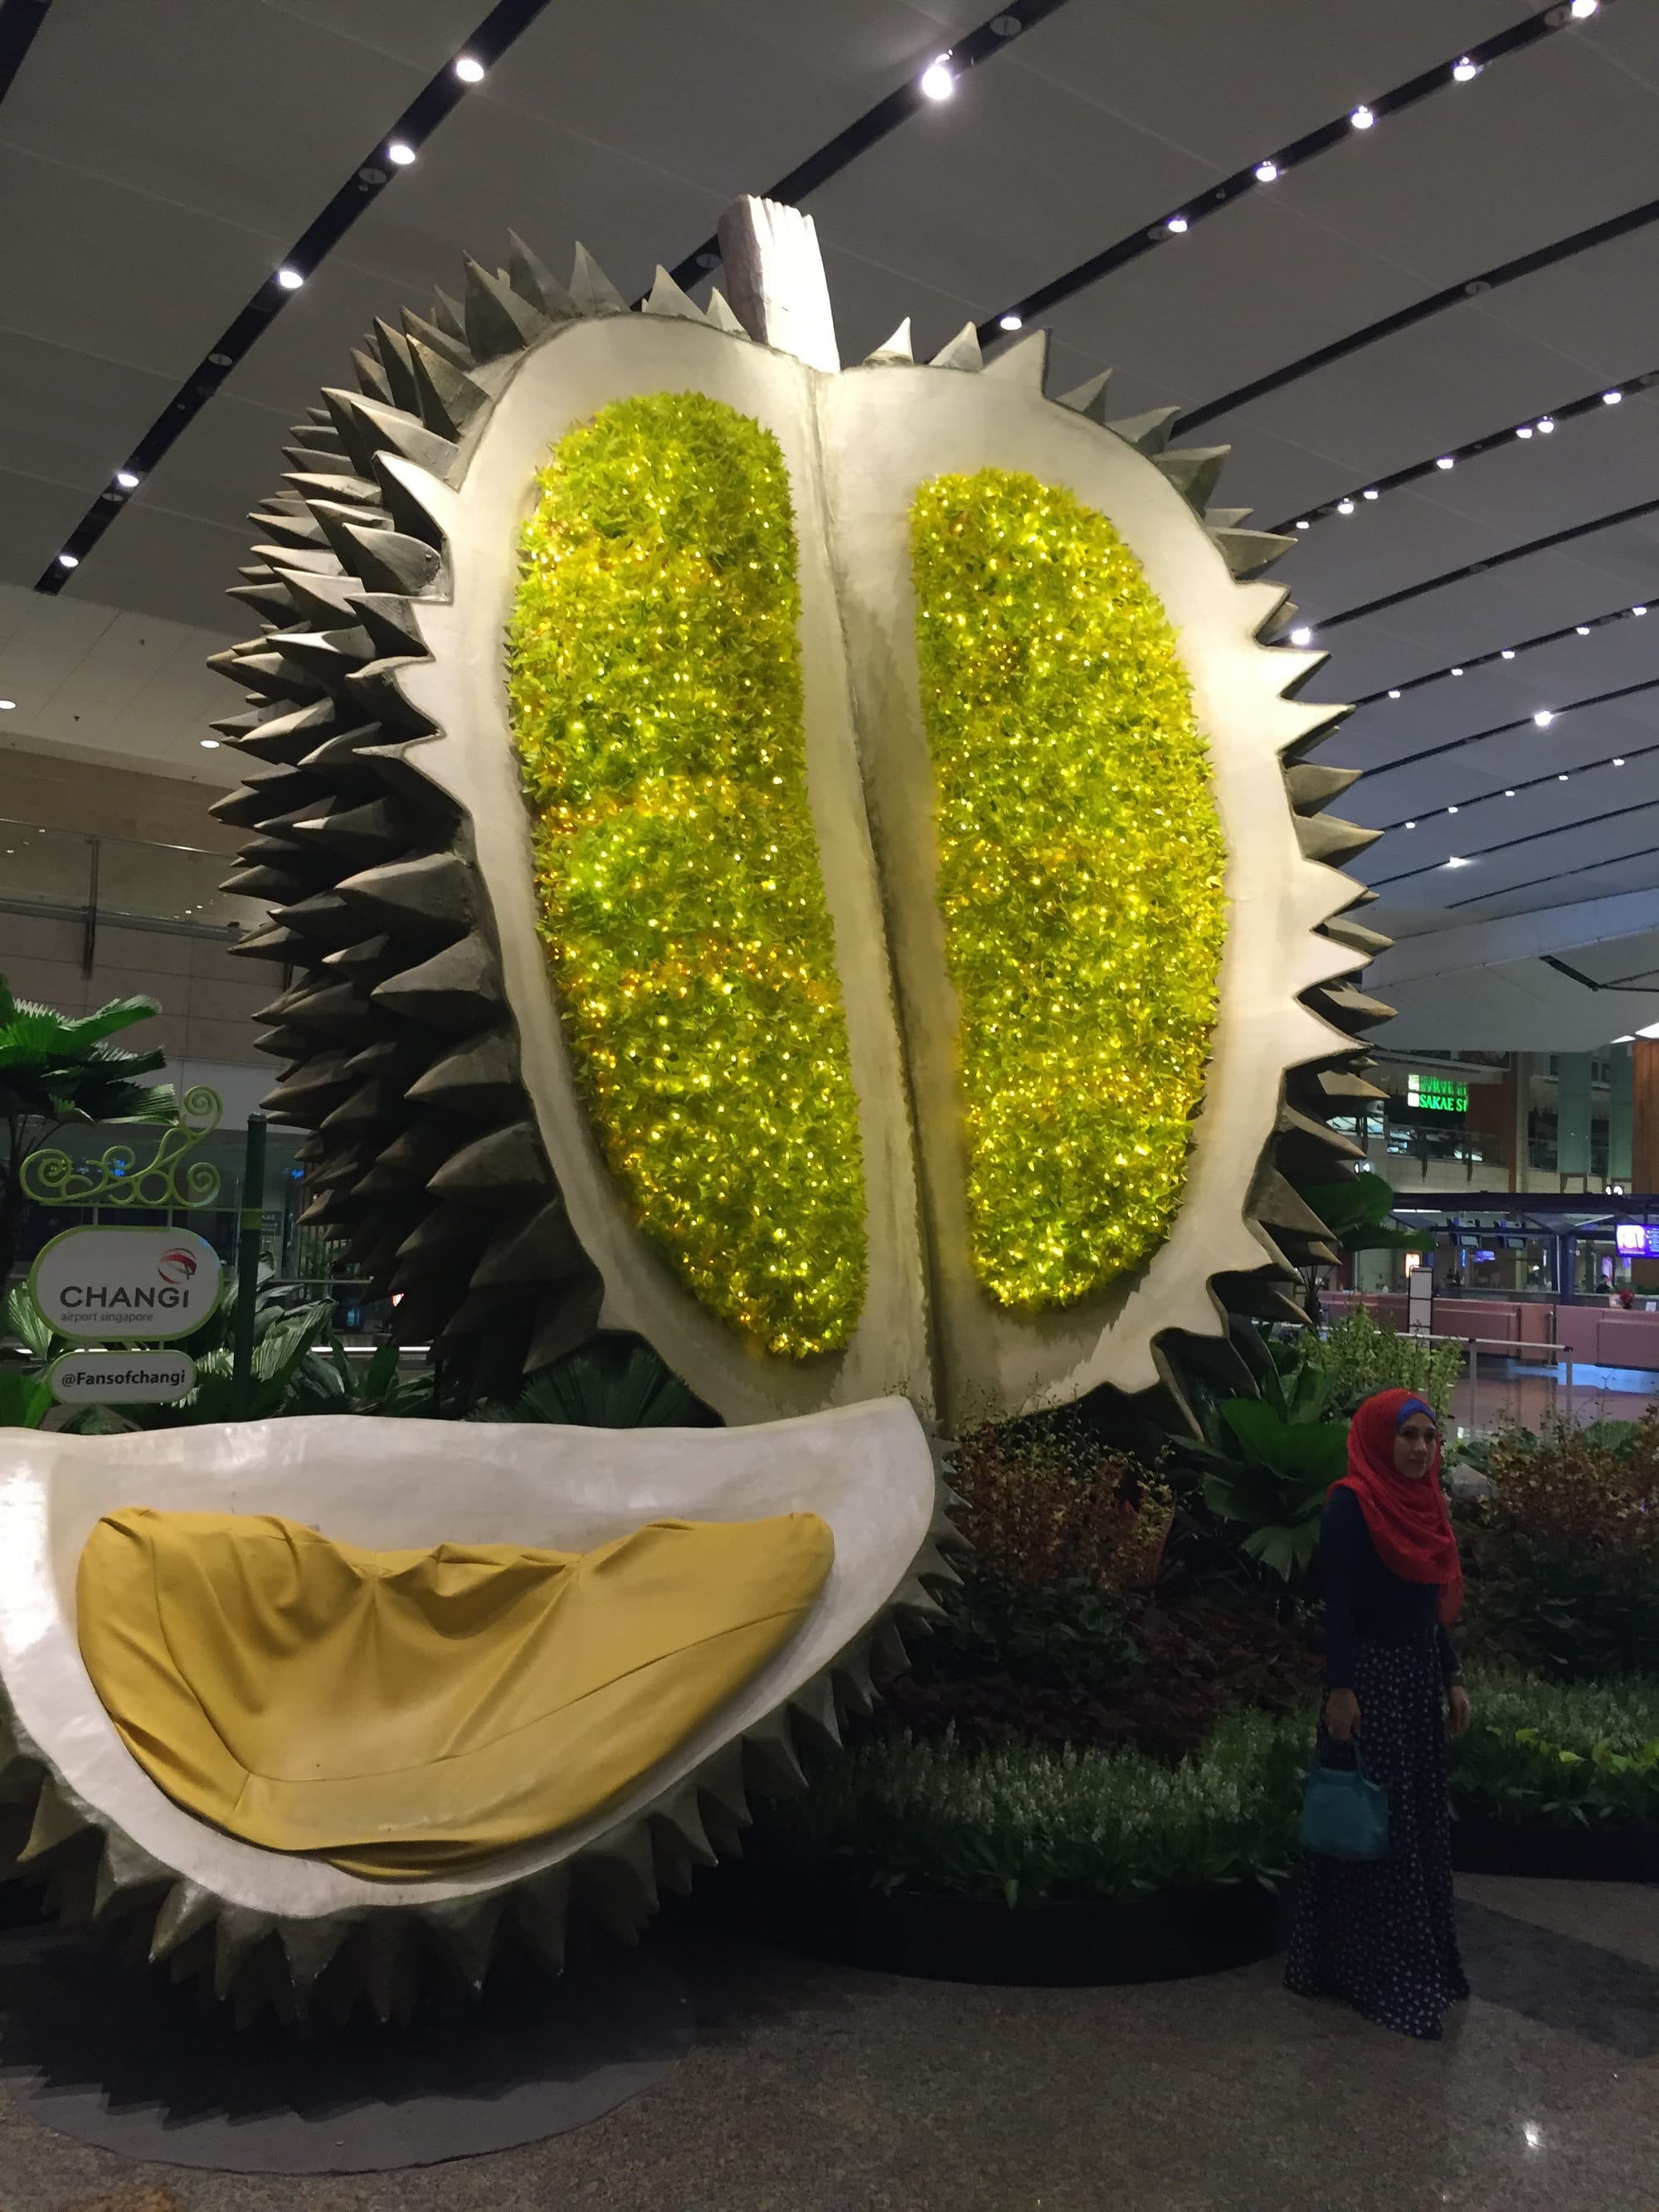 Photo by Author — a massive Durian model at Changi Airport, Singapore